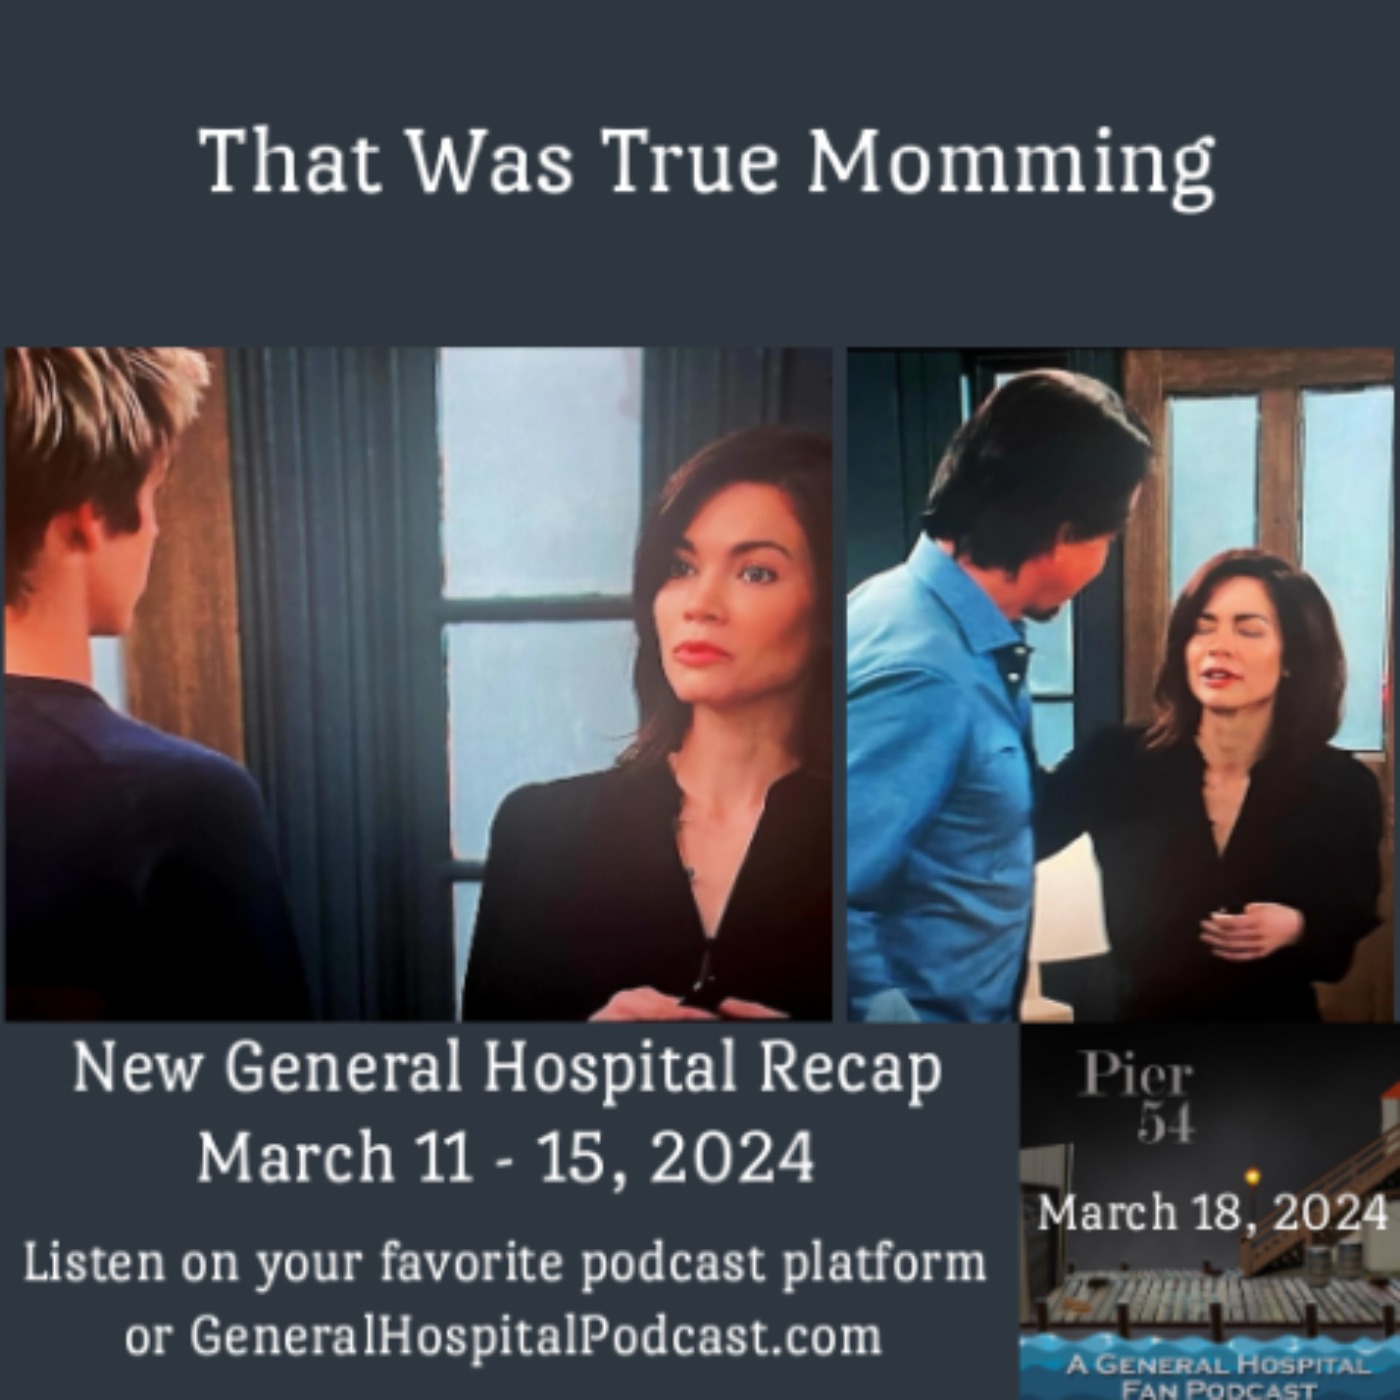 Episode 527: That Was True Momming 3/18/2024